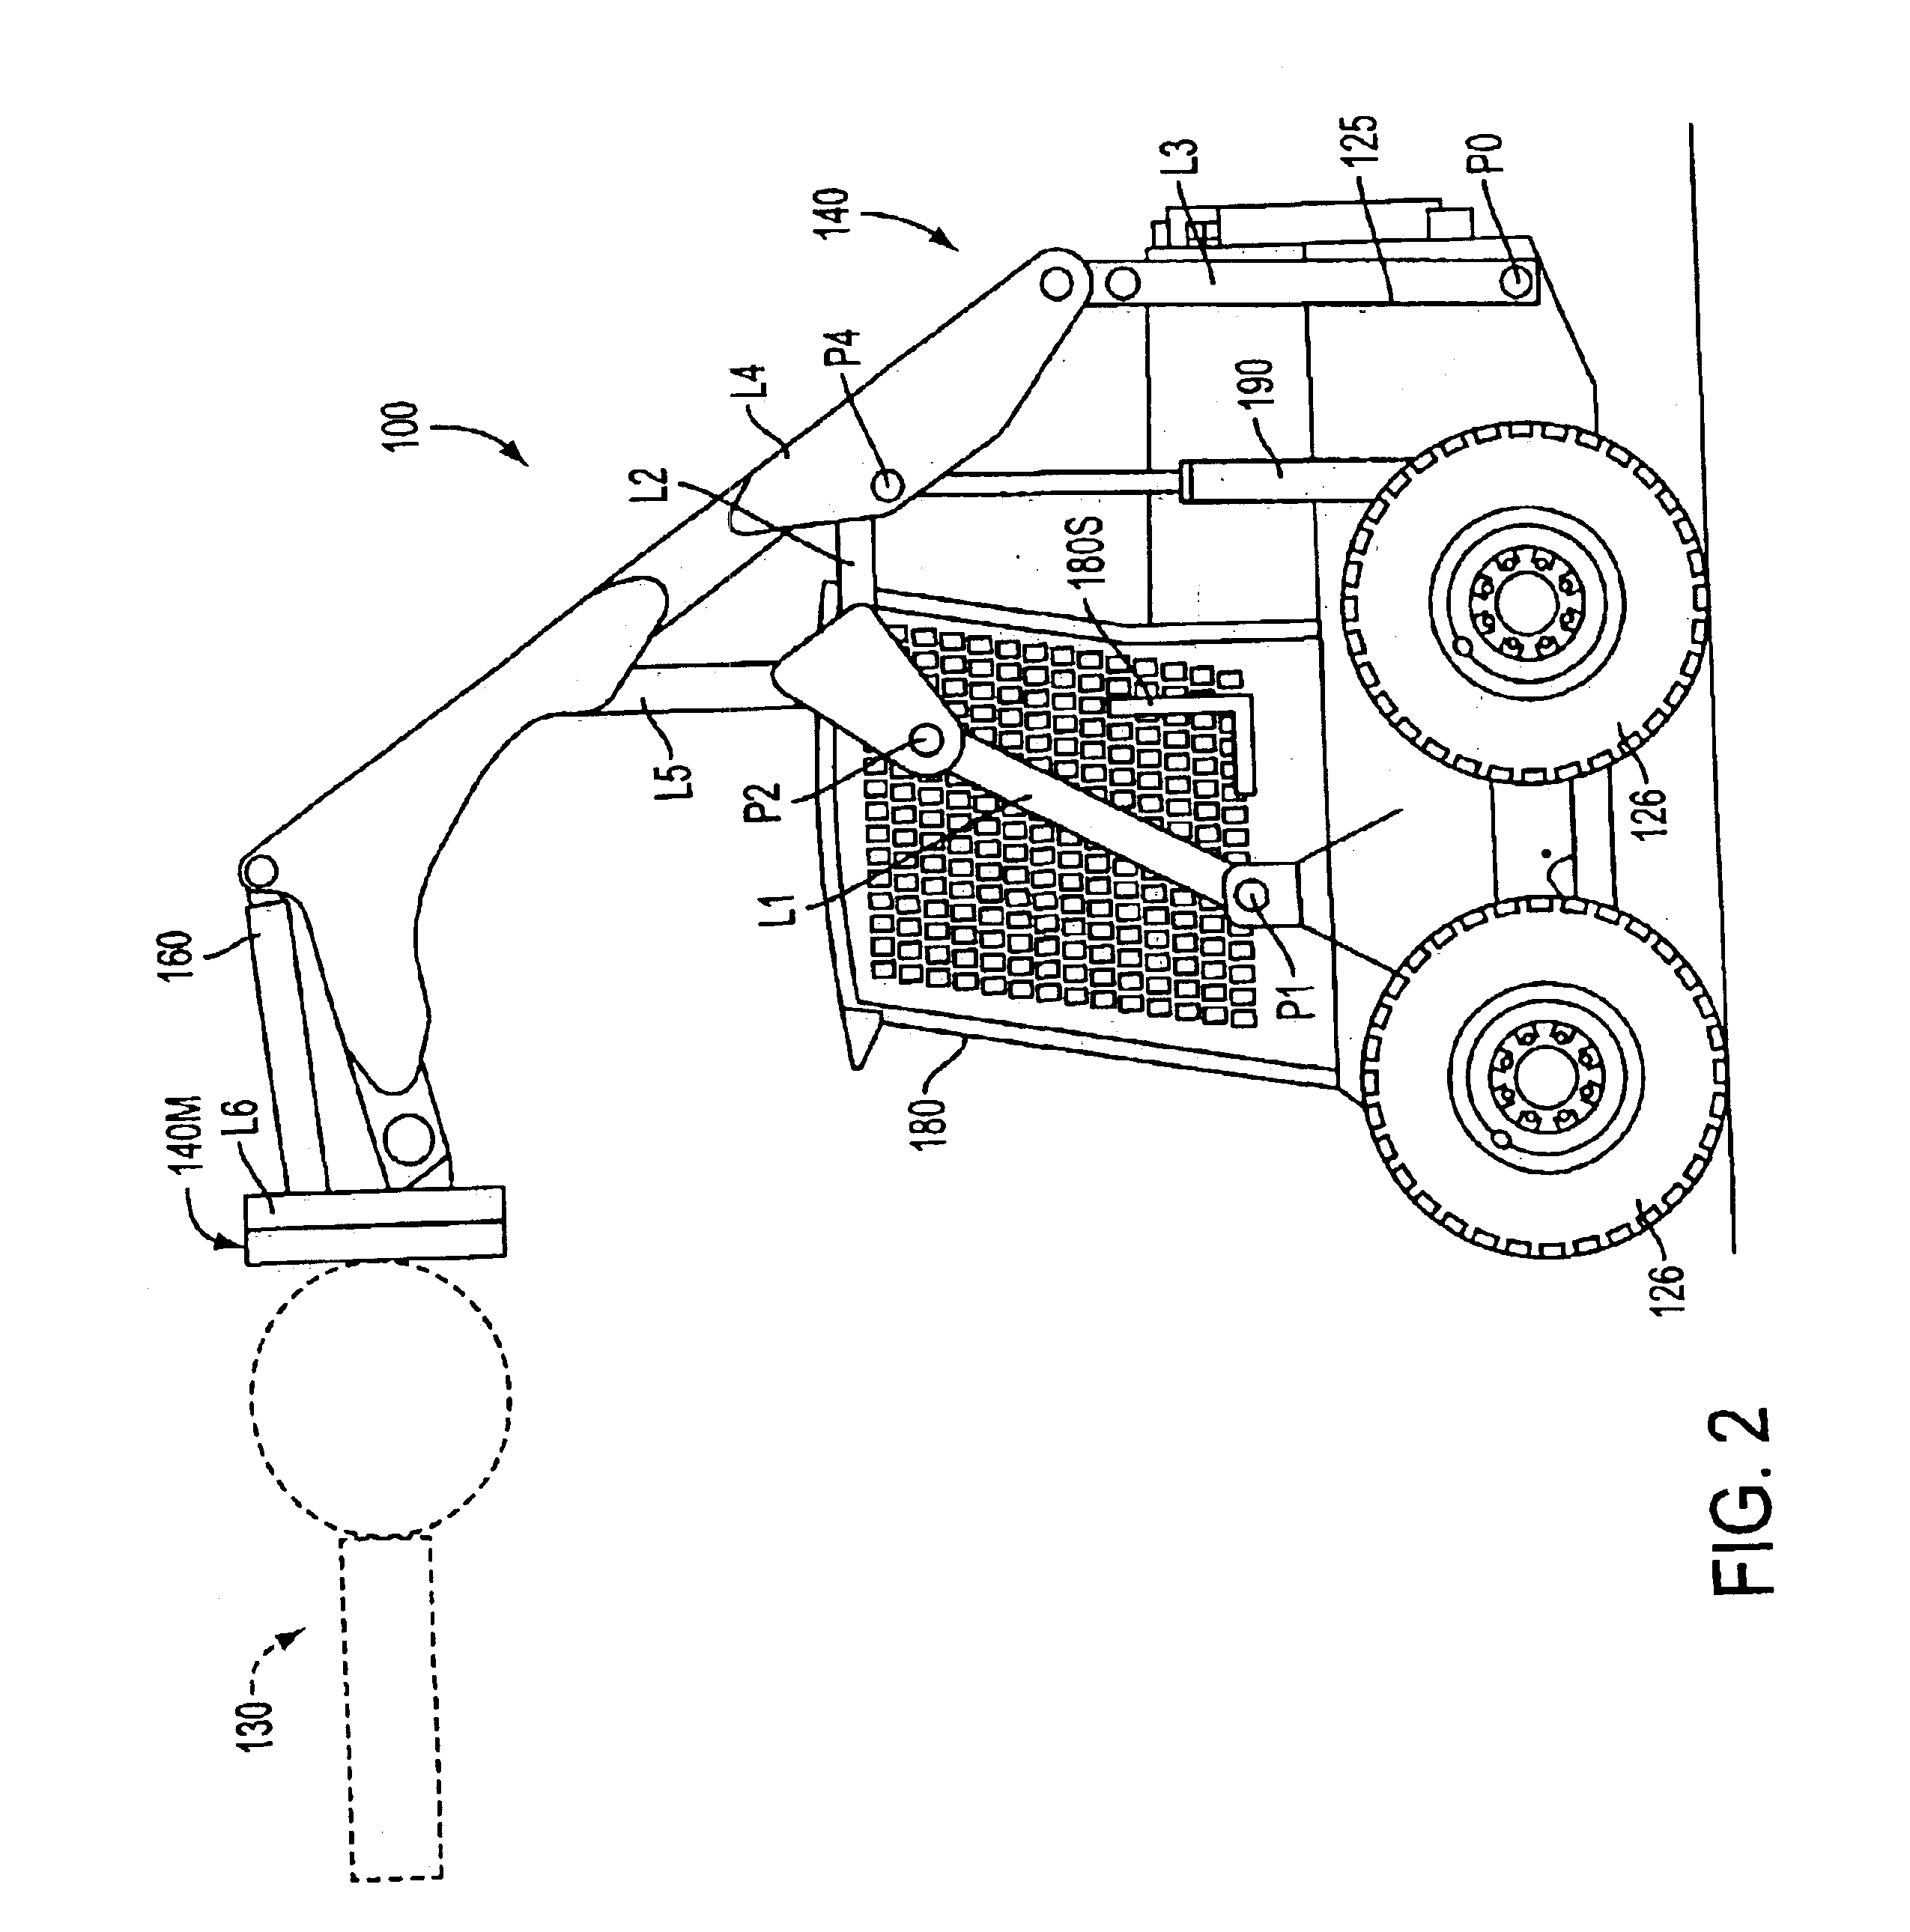 Utility device having an improved rotatable drive mechanism